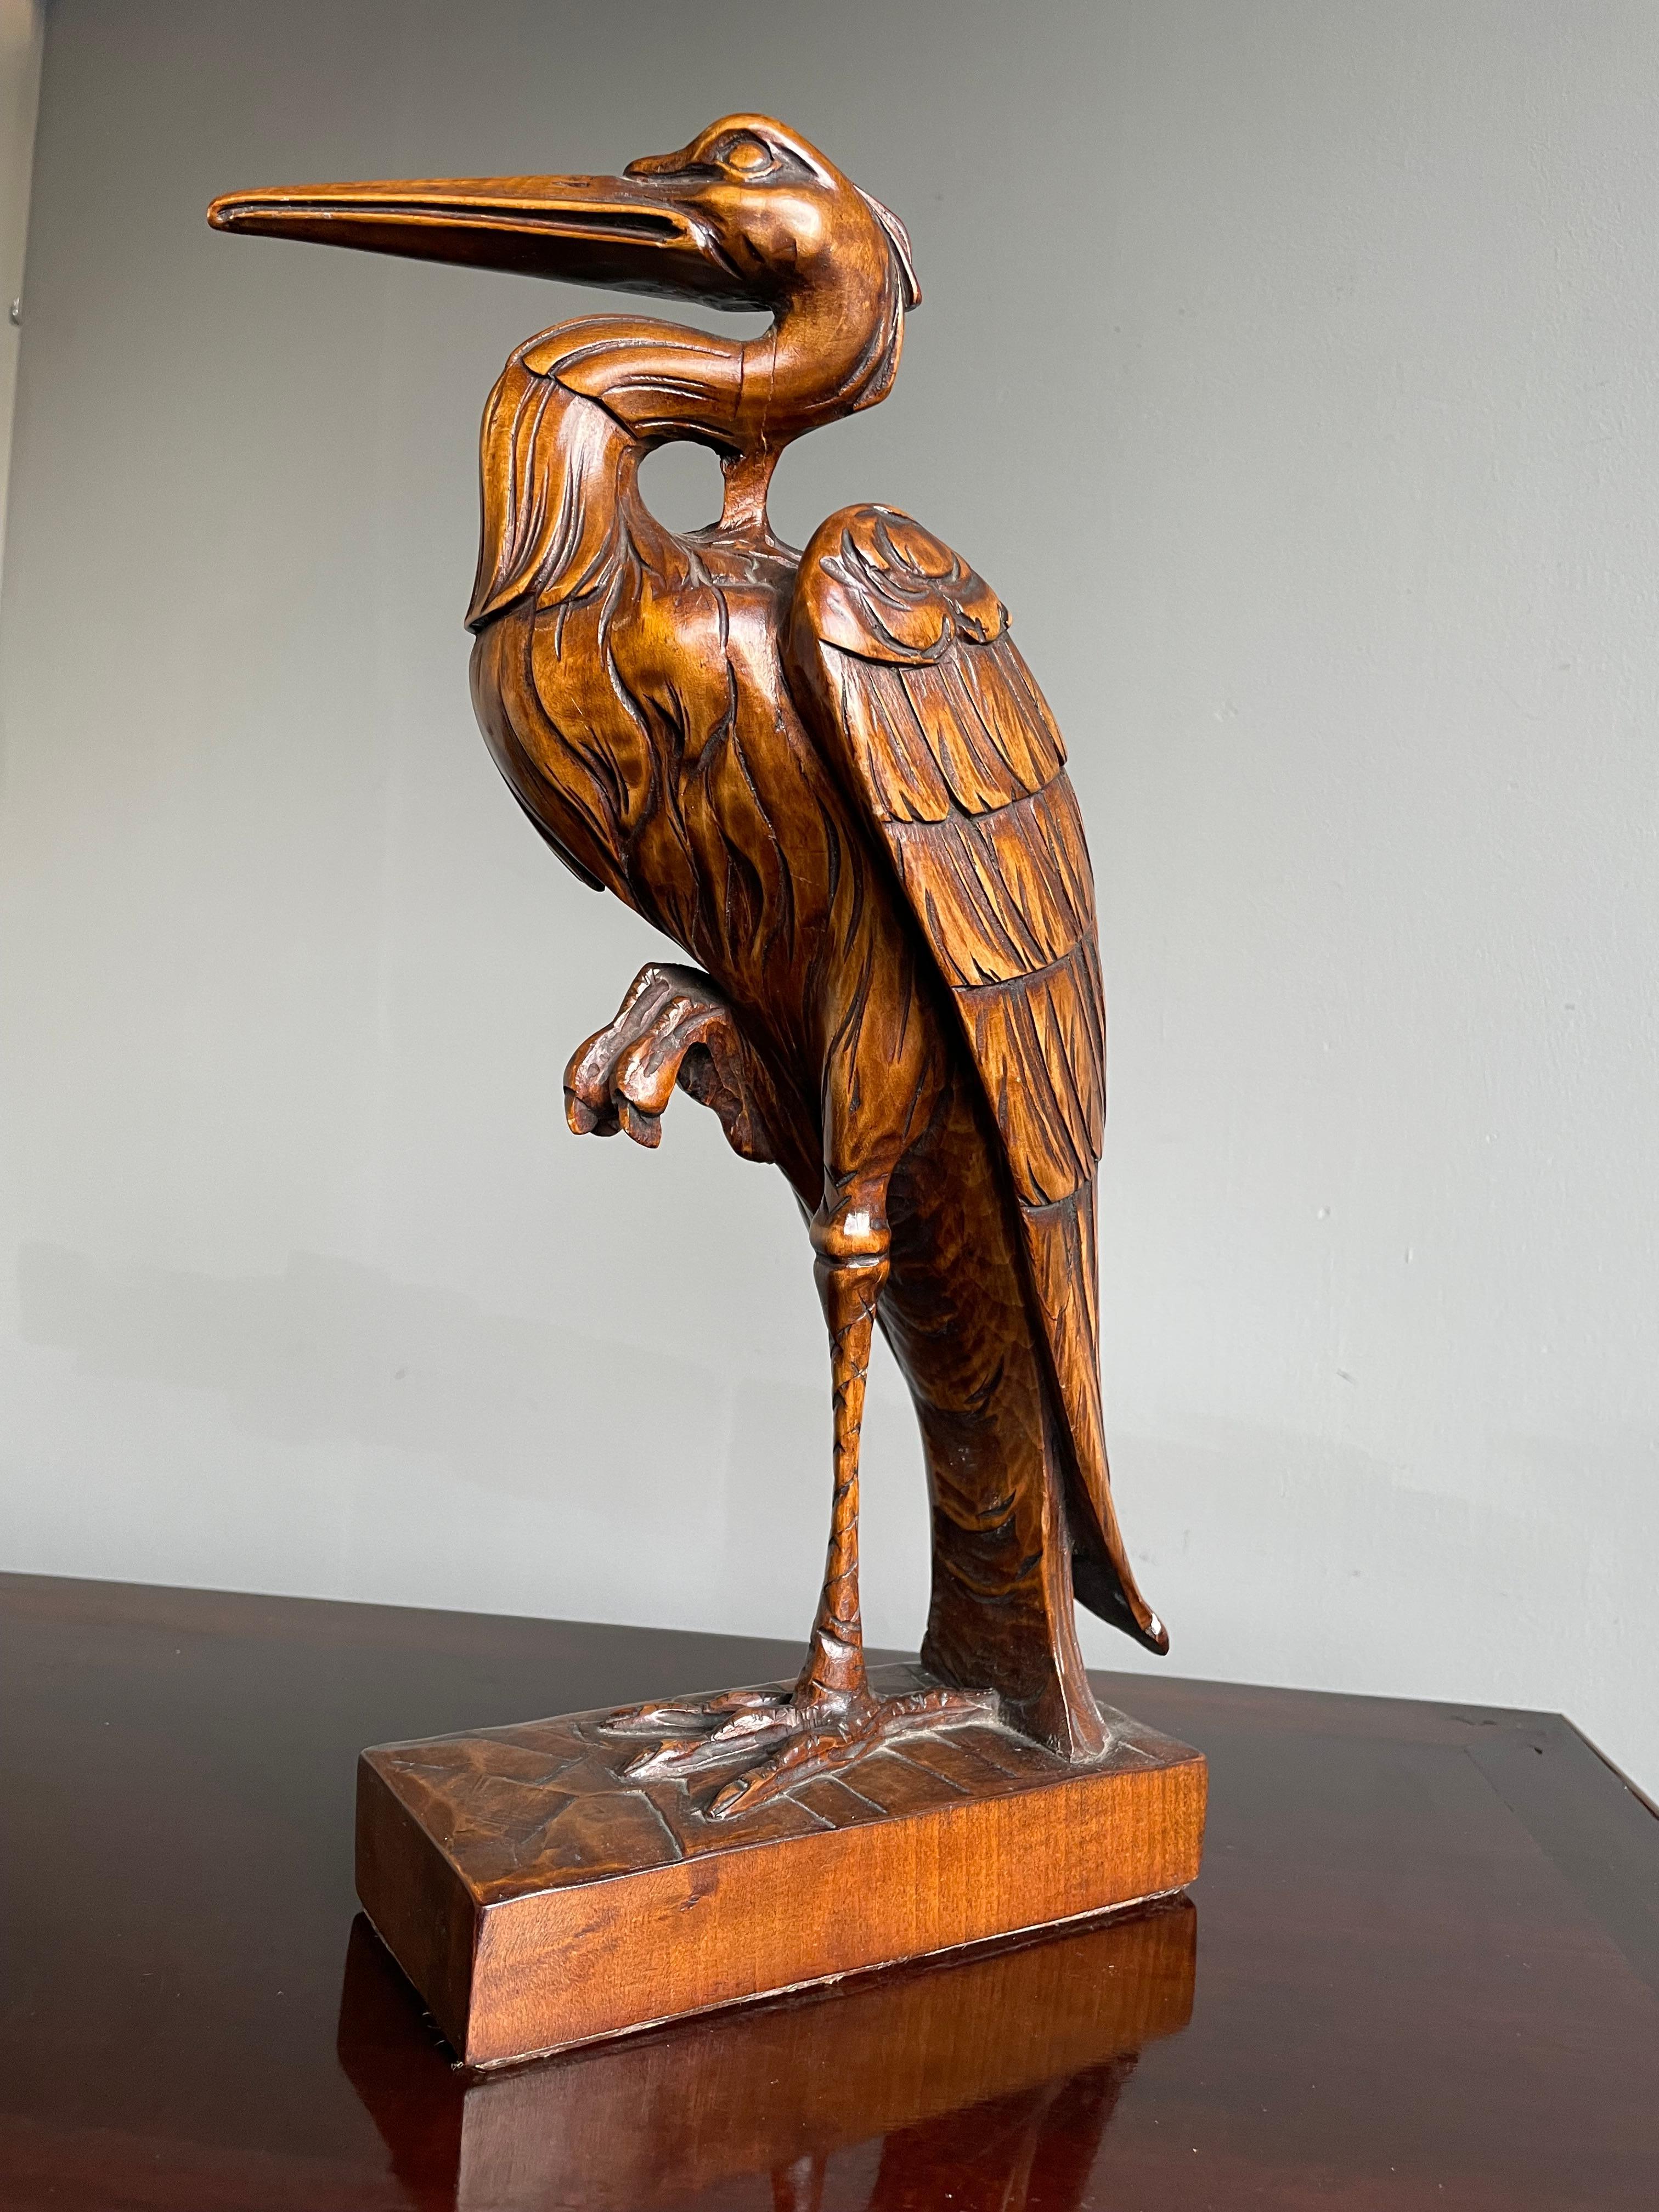 Wonderful, work-of-art-sculpture of a standing herron.
 
Anyone who has ever tried to pursue a career in any kind of artform knows how incredibly difficult it is to be unique and to be truly gifted in creating. You need to at least have 'the eye' to